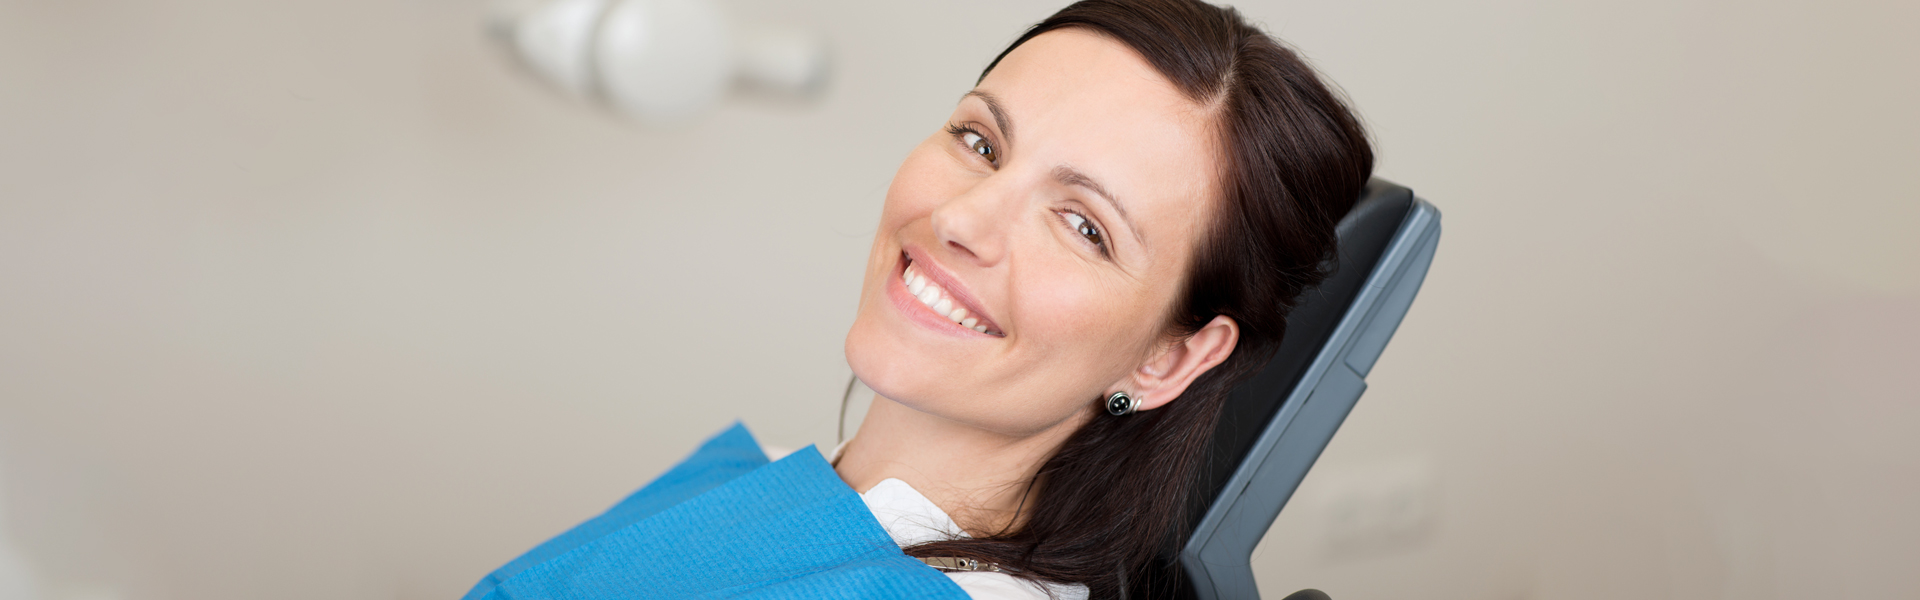 When Is Tooth Extraction Recommended?